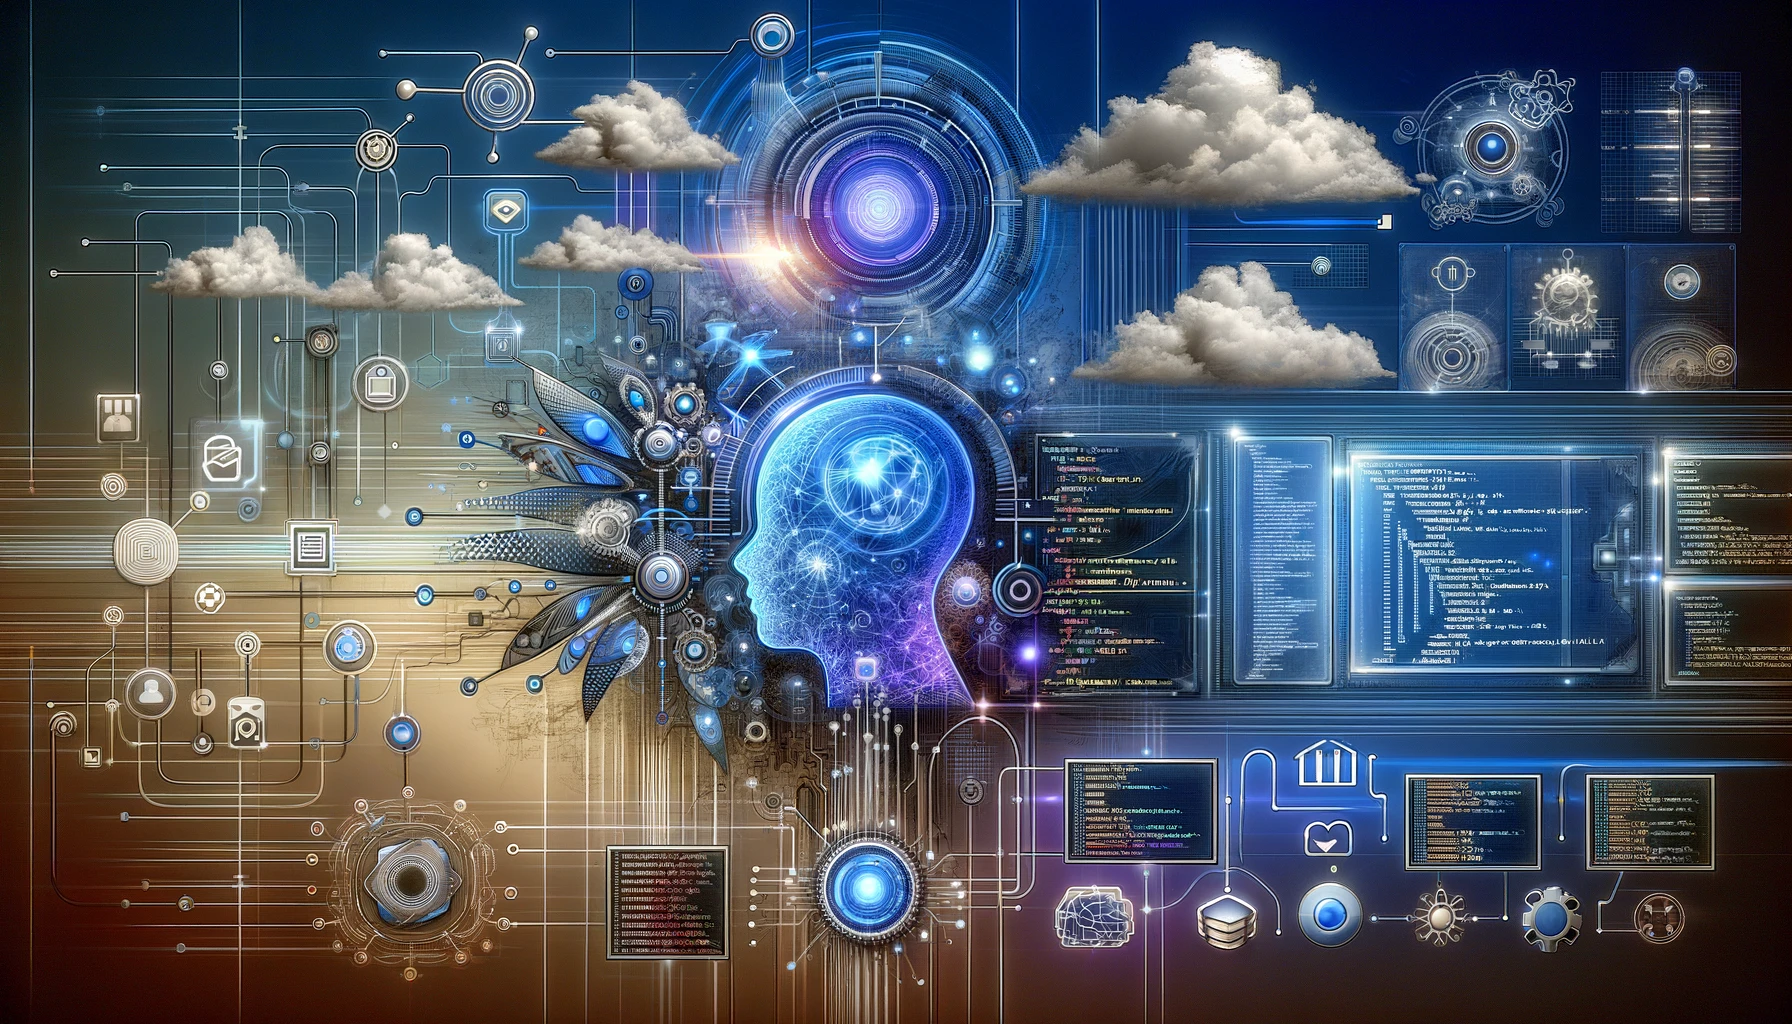 A digital artwork representing the fusion of AI and development workflows, inspired by The Culture series. The image features futuristic elements like advanced AI interfaces, sleek cloud servers, and interconnected networks. There are visual representations of AI agents interacting with users, code snippets, and user interface icons. The background includes a gradient of blues and purples, evoking a sense of depth and forward motion, with subtle nods to The Culture&#39;s utopian technology and societal harmony. The overall theme is innovative and forward-thinking, highlighting the integration of cutting-edge technology and collaborative development.